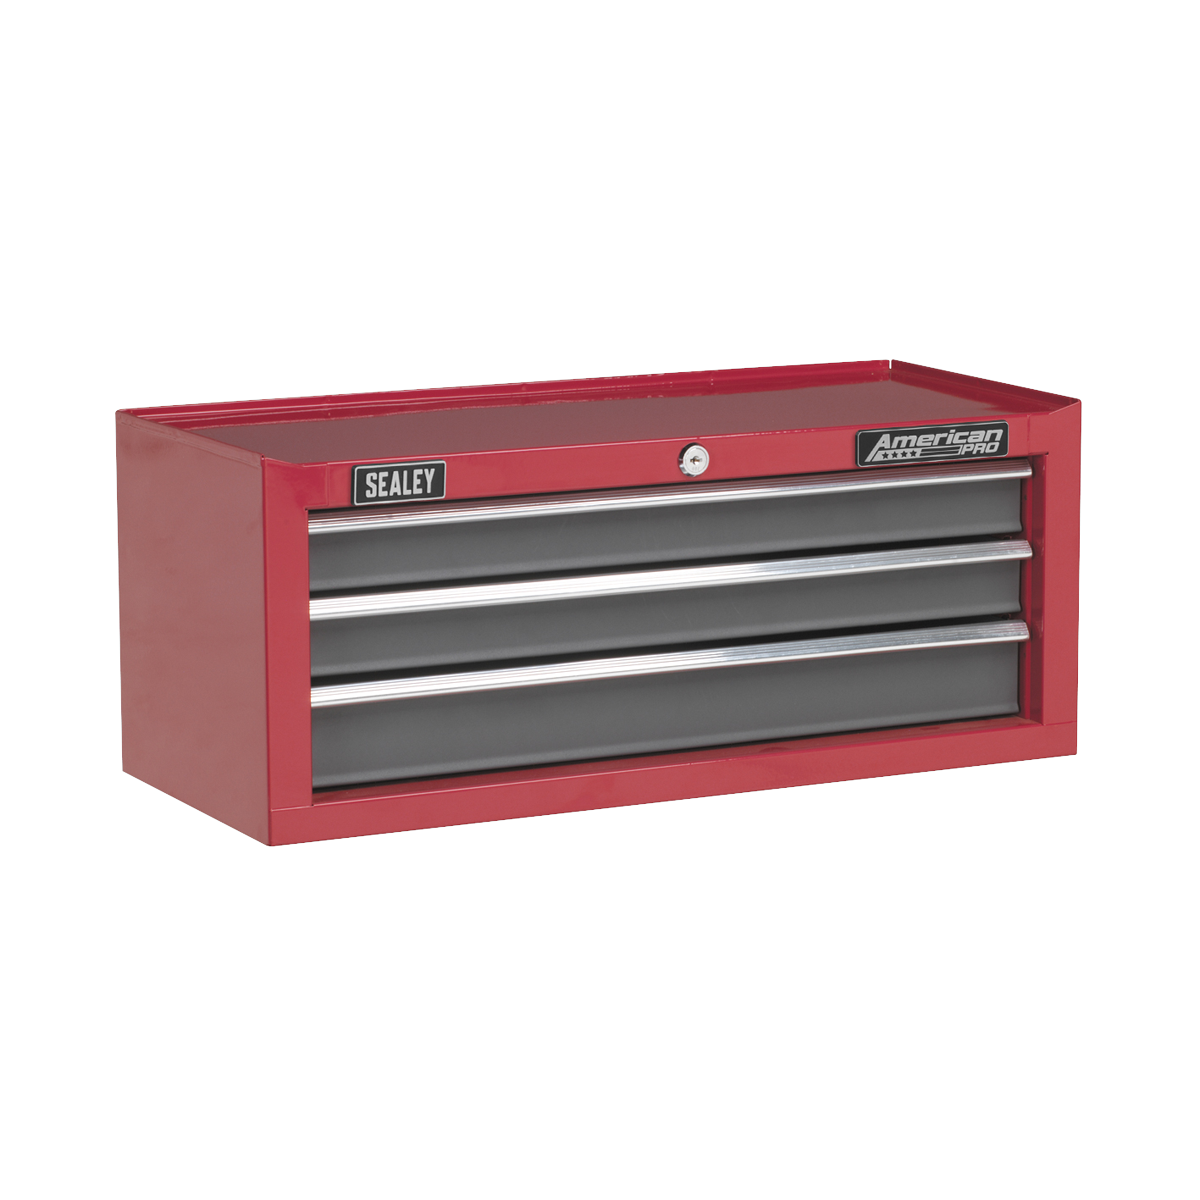 Sealey Mid-Box 3 Drawer with Ball-Bearing Slides - Red/Grey